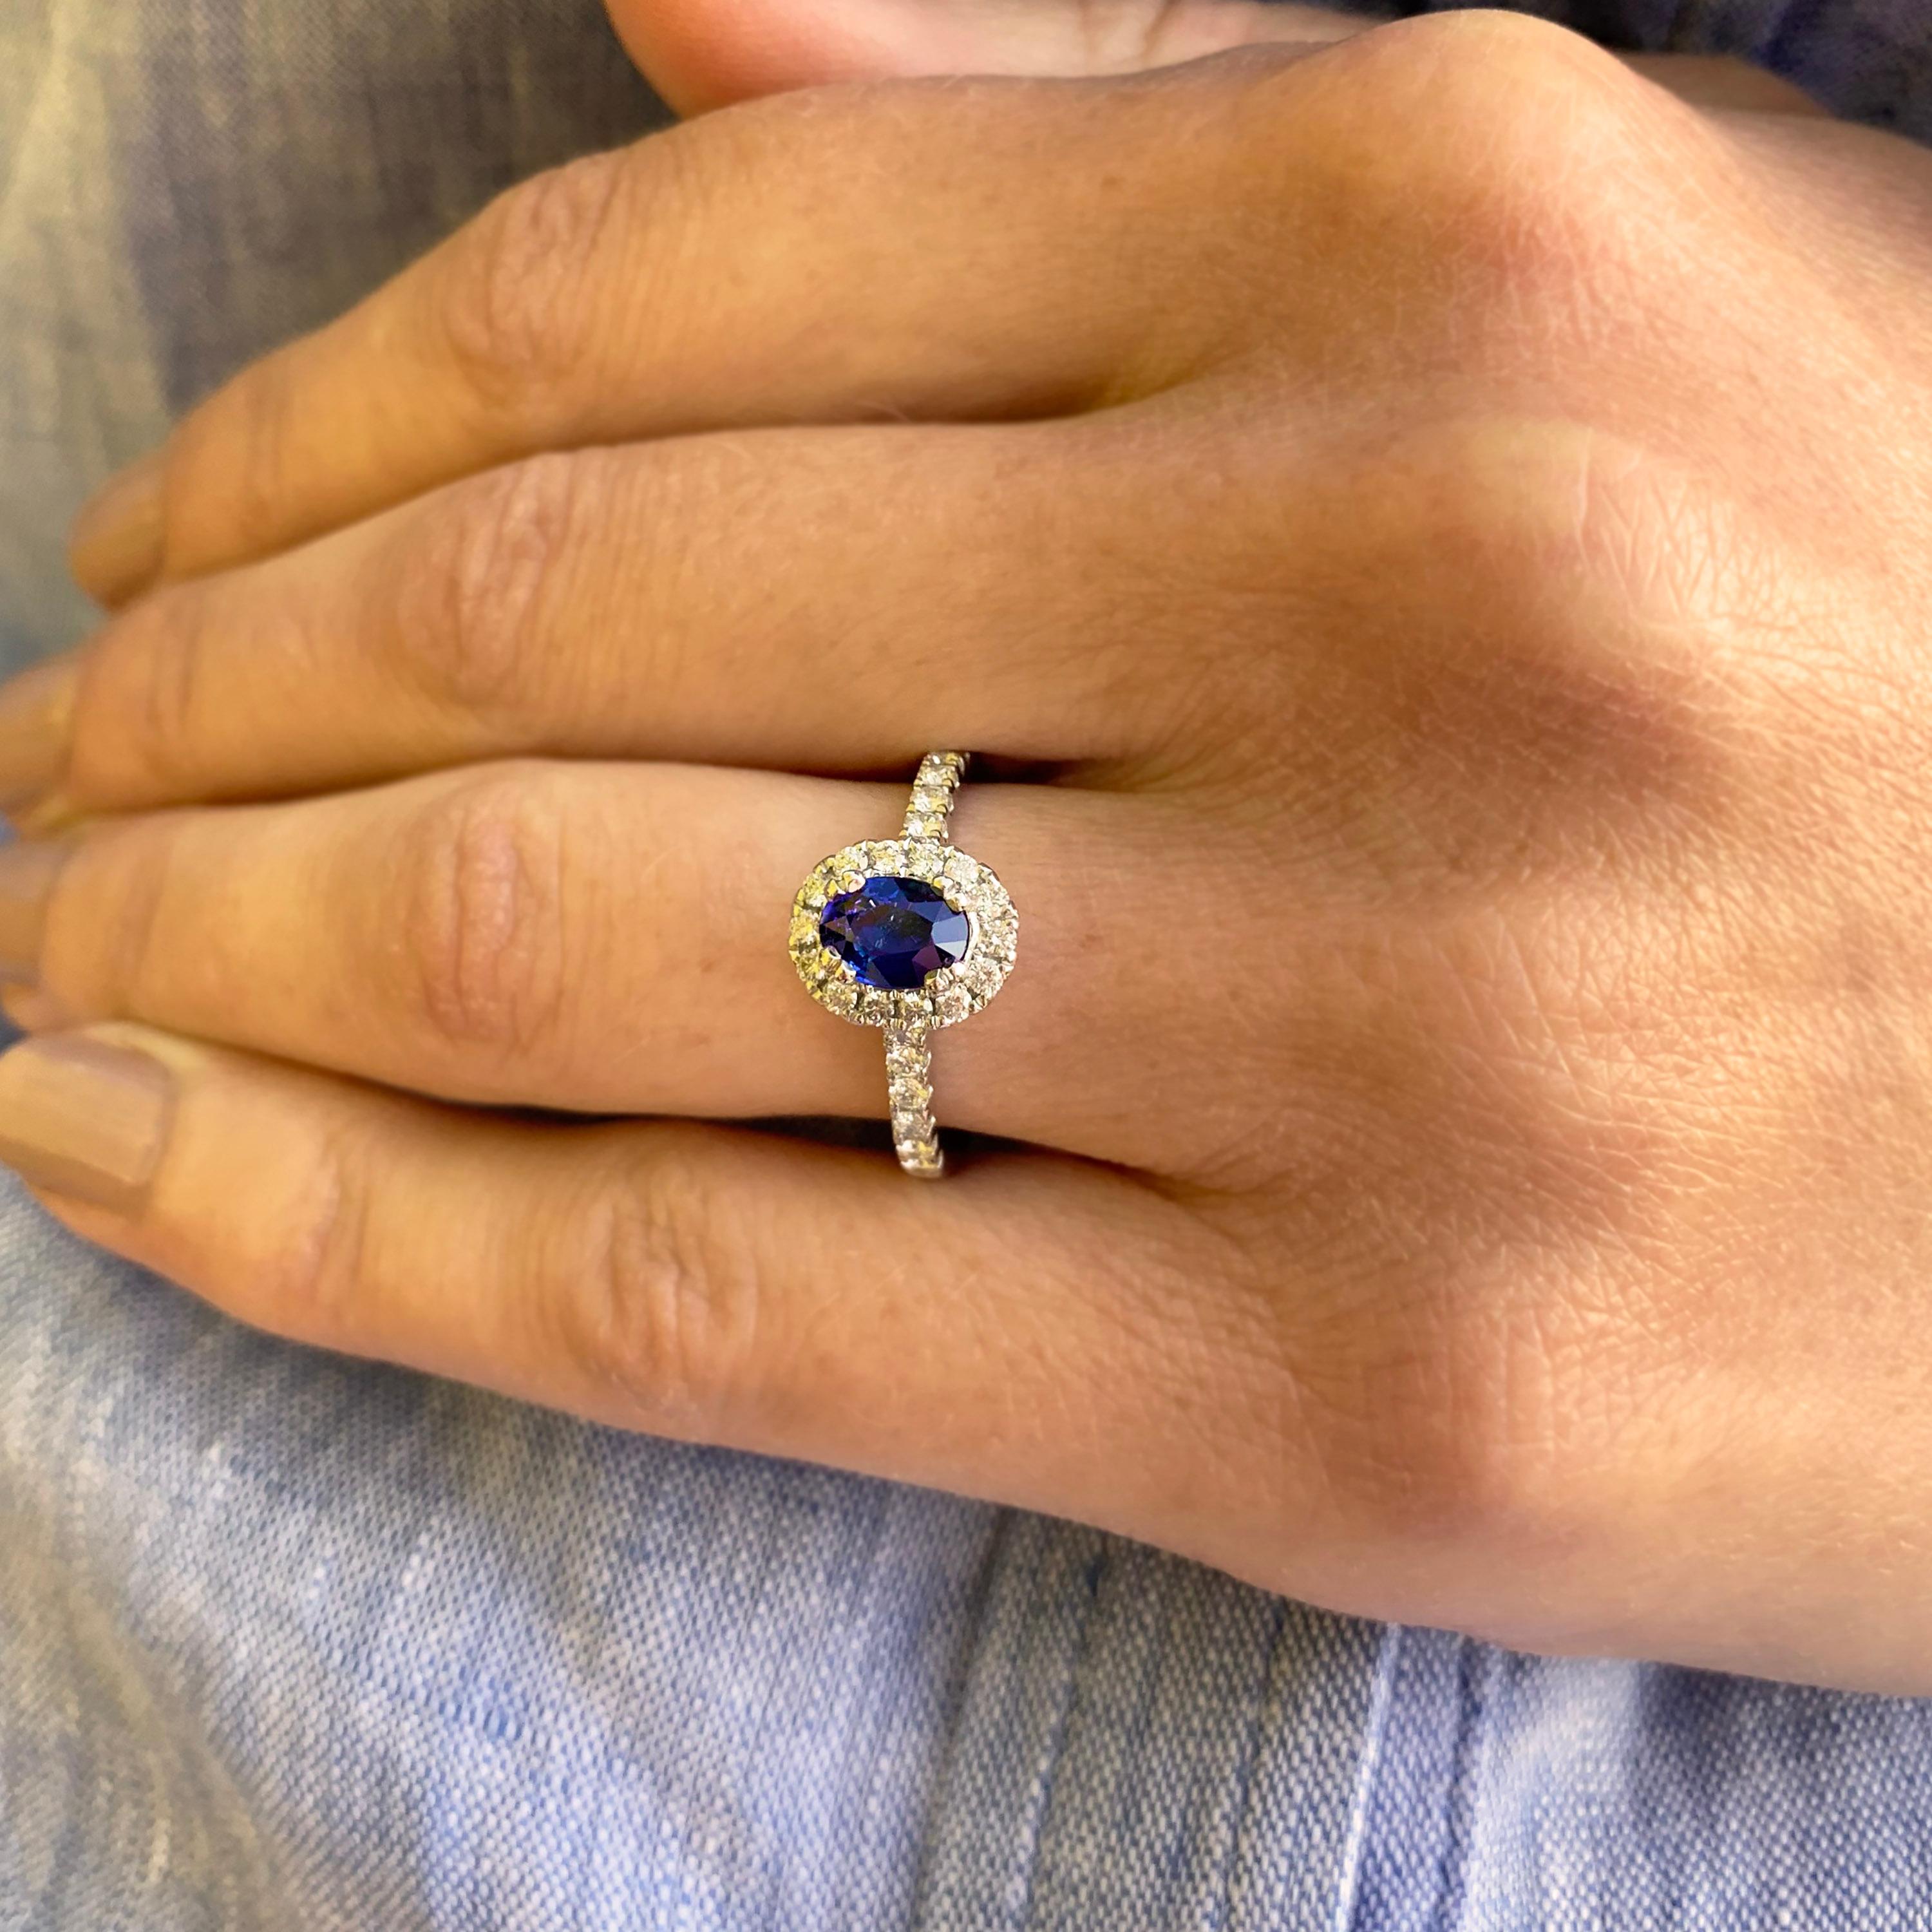 18 Karat White Gold Sapphire Halo Engagement Ring In New Condition For Sale In Dublin 2, Dublin 2